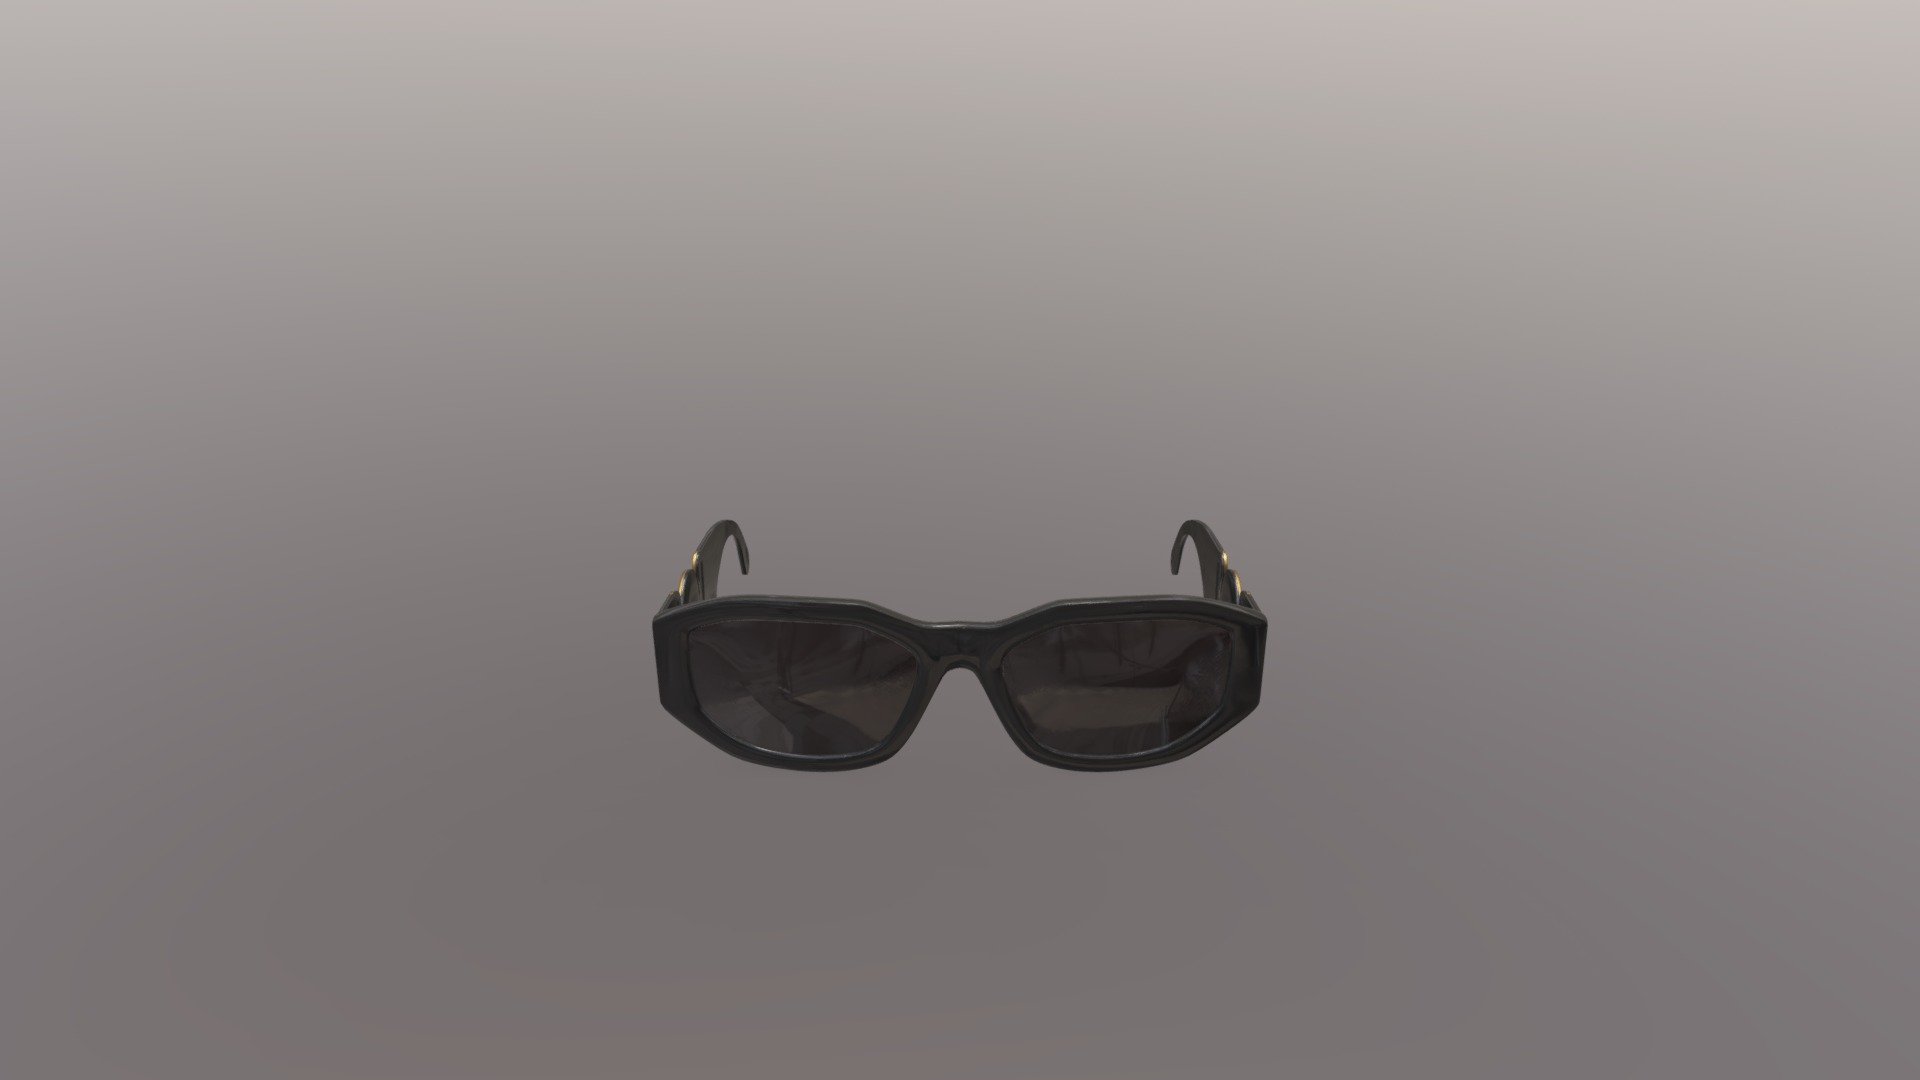 Sunglasses model Versace Biggie.
Made in Blender 
File size: 31.9 MiB
Face count: 41.4k - Sunglasses versace - 3D model by giovanikadmos 3d model